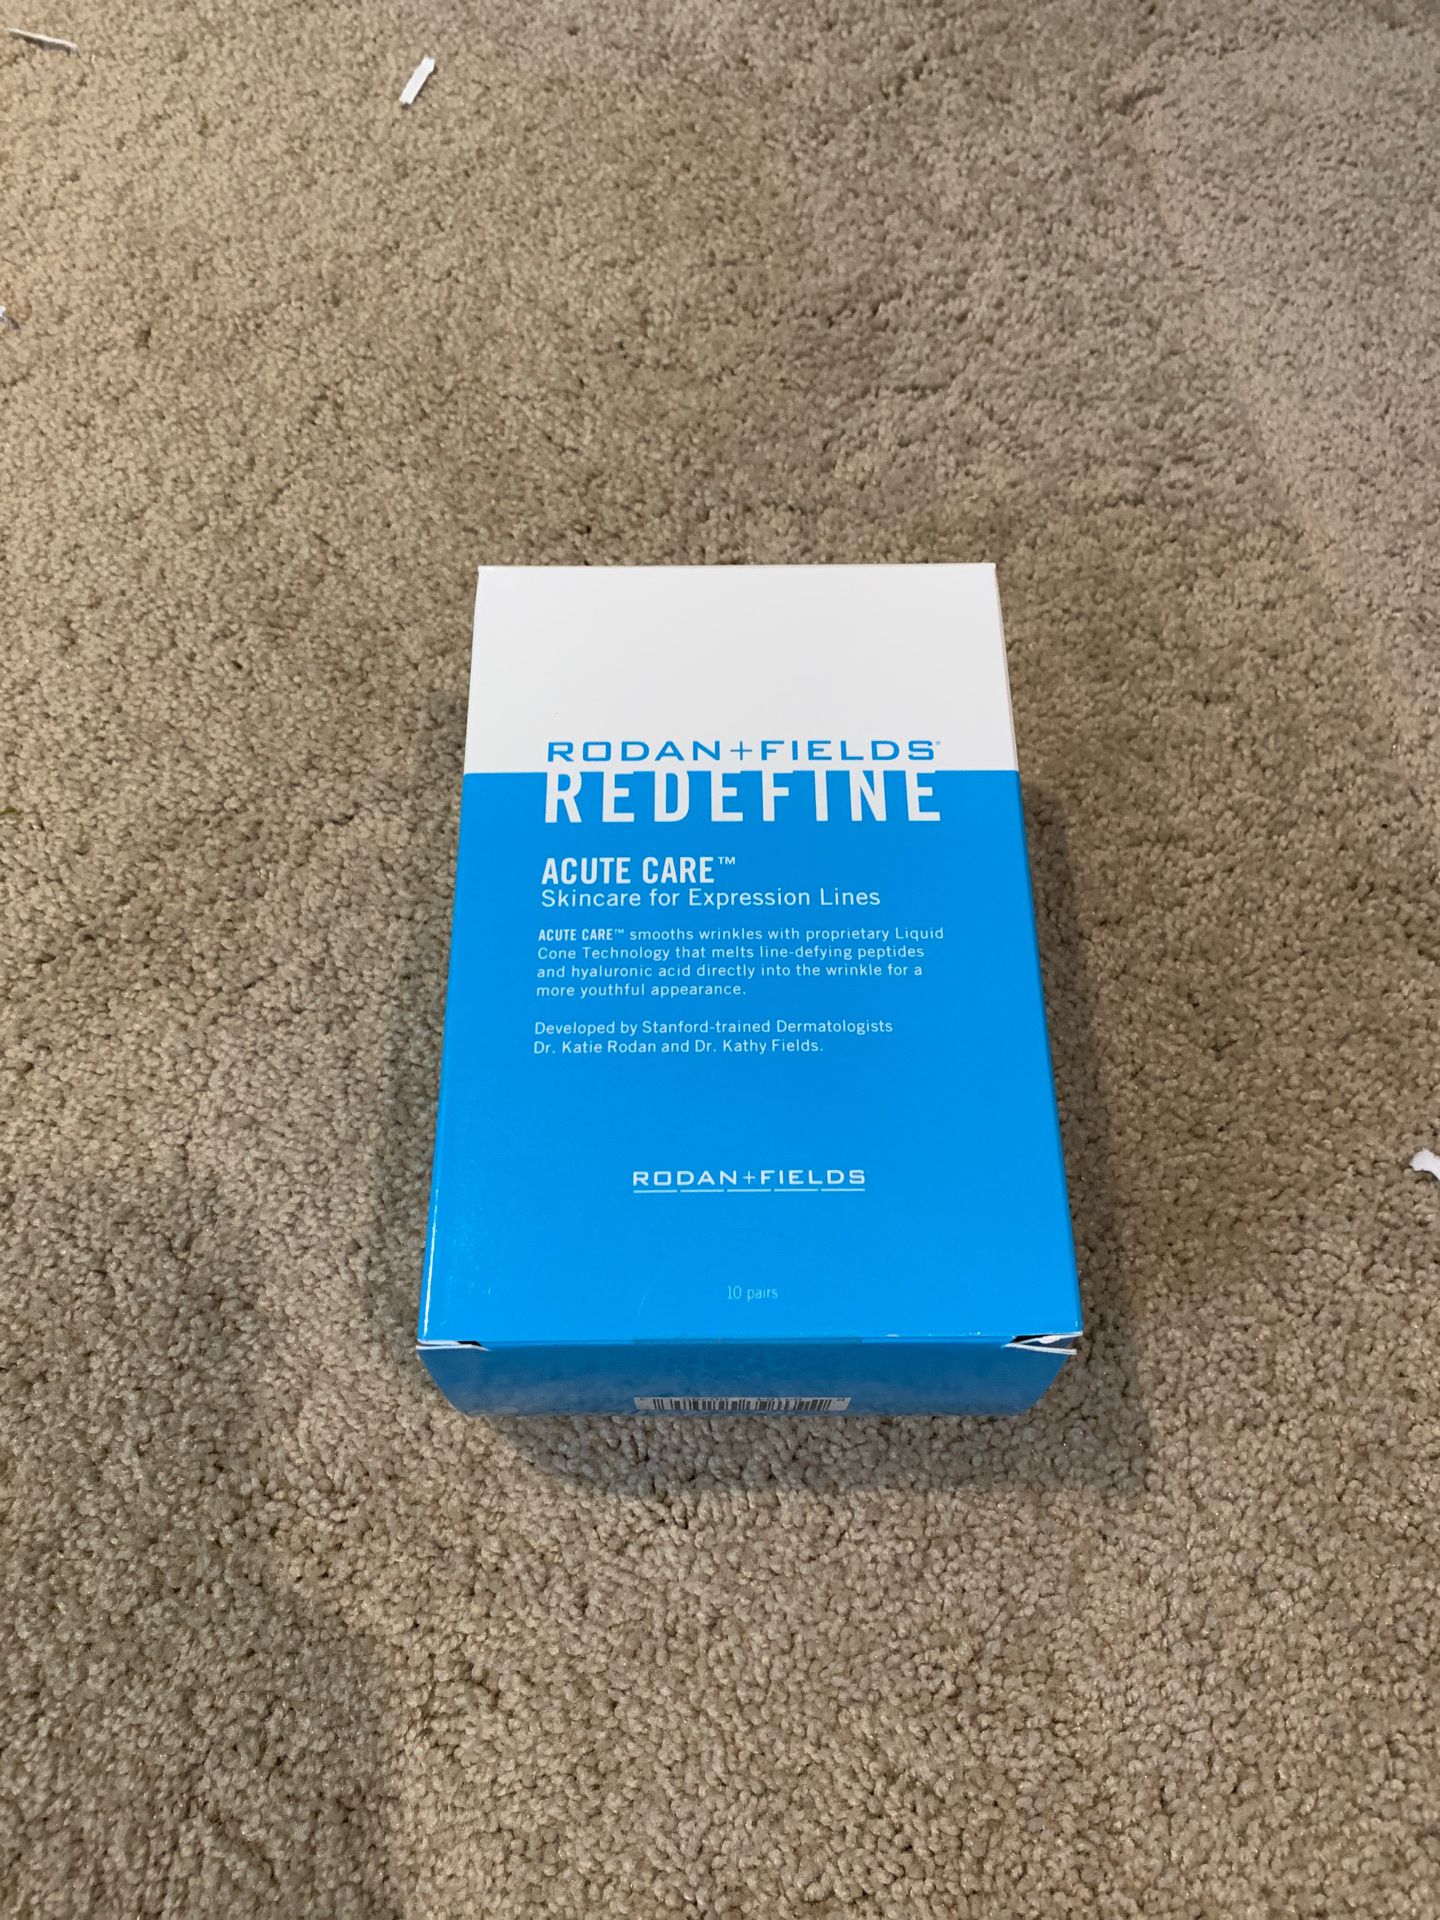 8 pairs of Rodan +Fields Acute Care patches